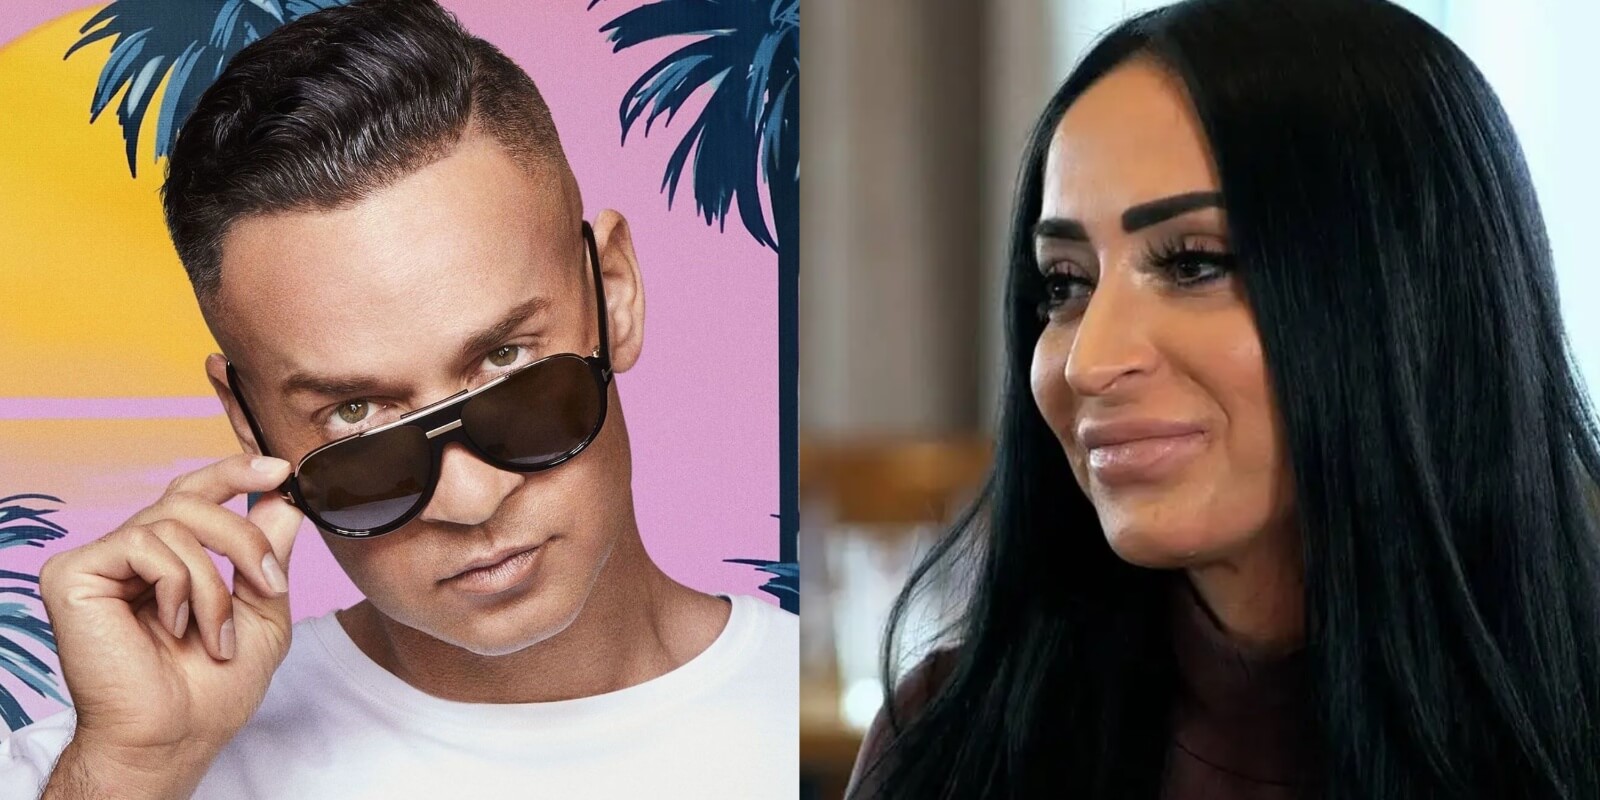 'Jersey Shore' stars Mike Sorrentino and Angelina Pivarnick in side-by-side photographs.